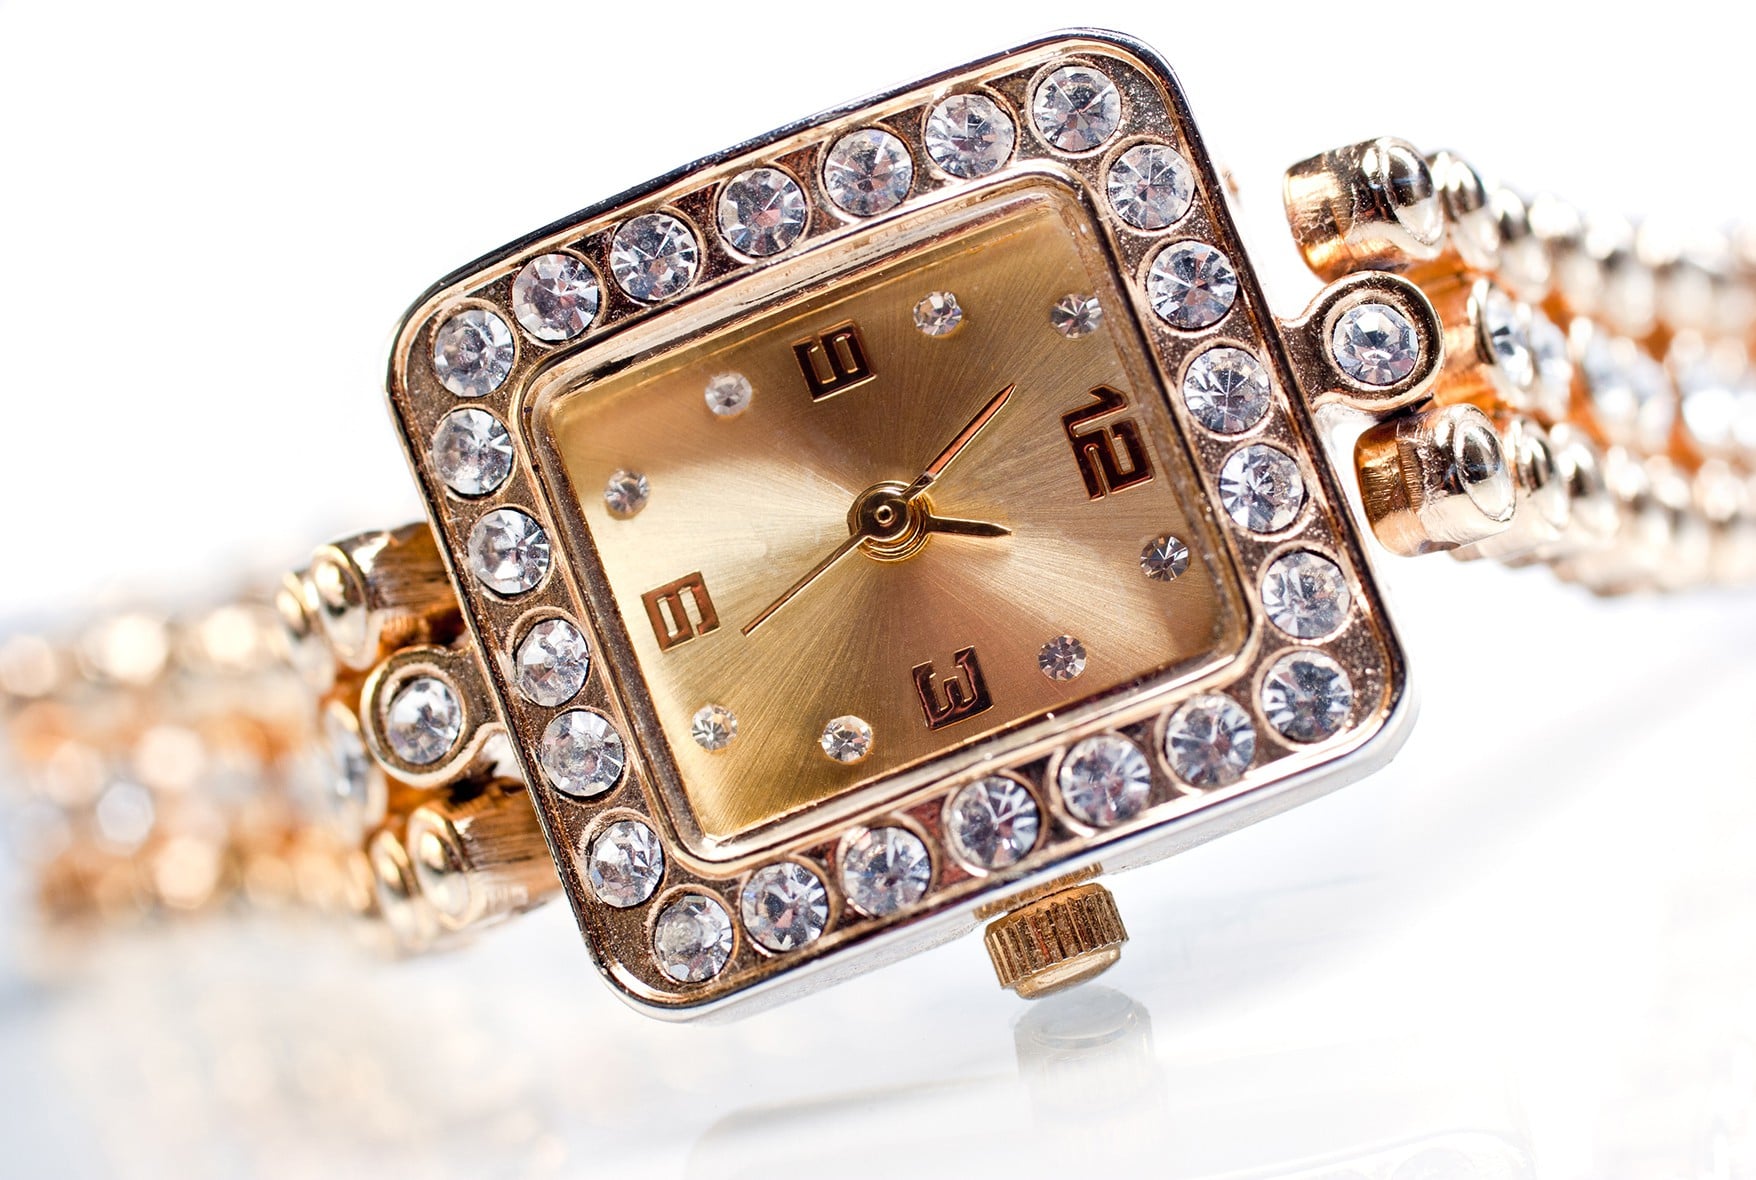 34 jewelry watches to drool over!